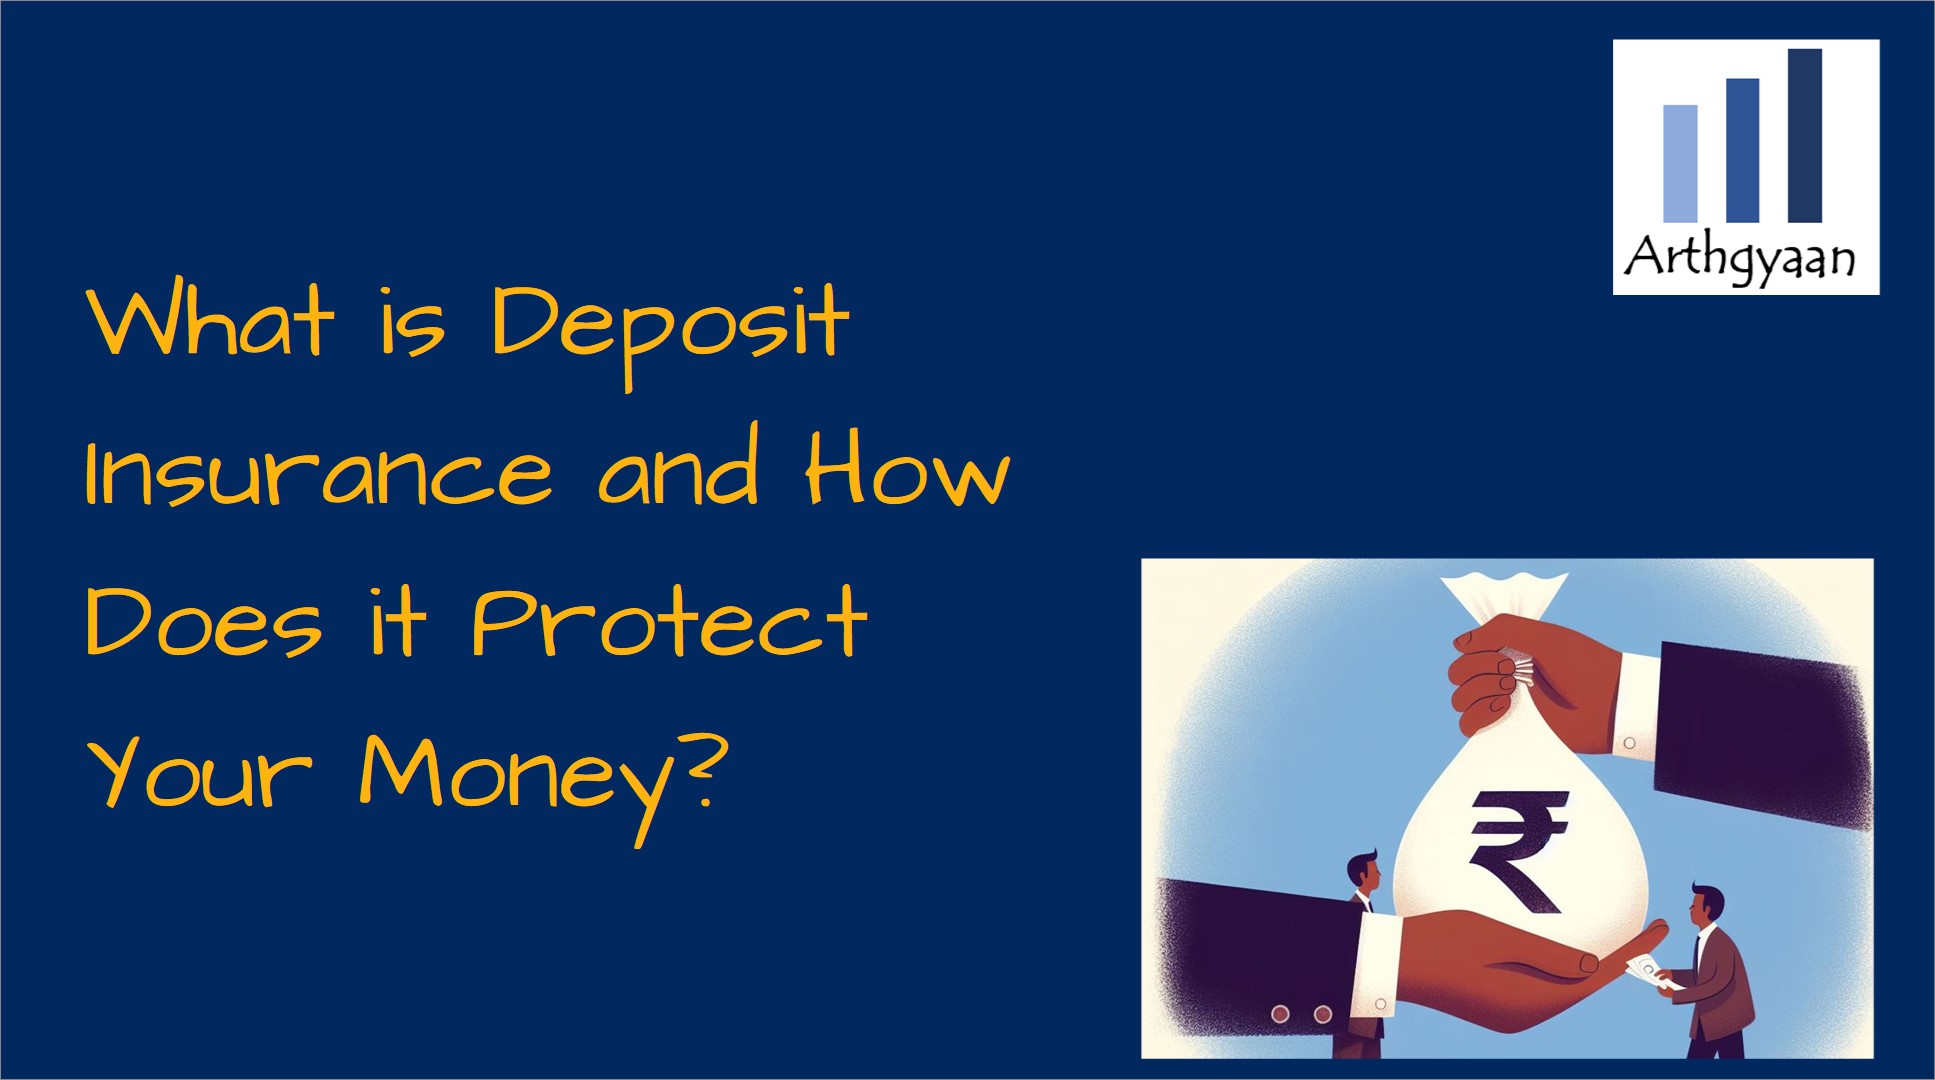 What is Deposit Insurance and How Does it Protect Your Money?